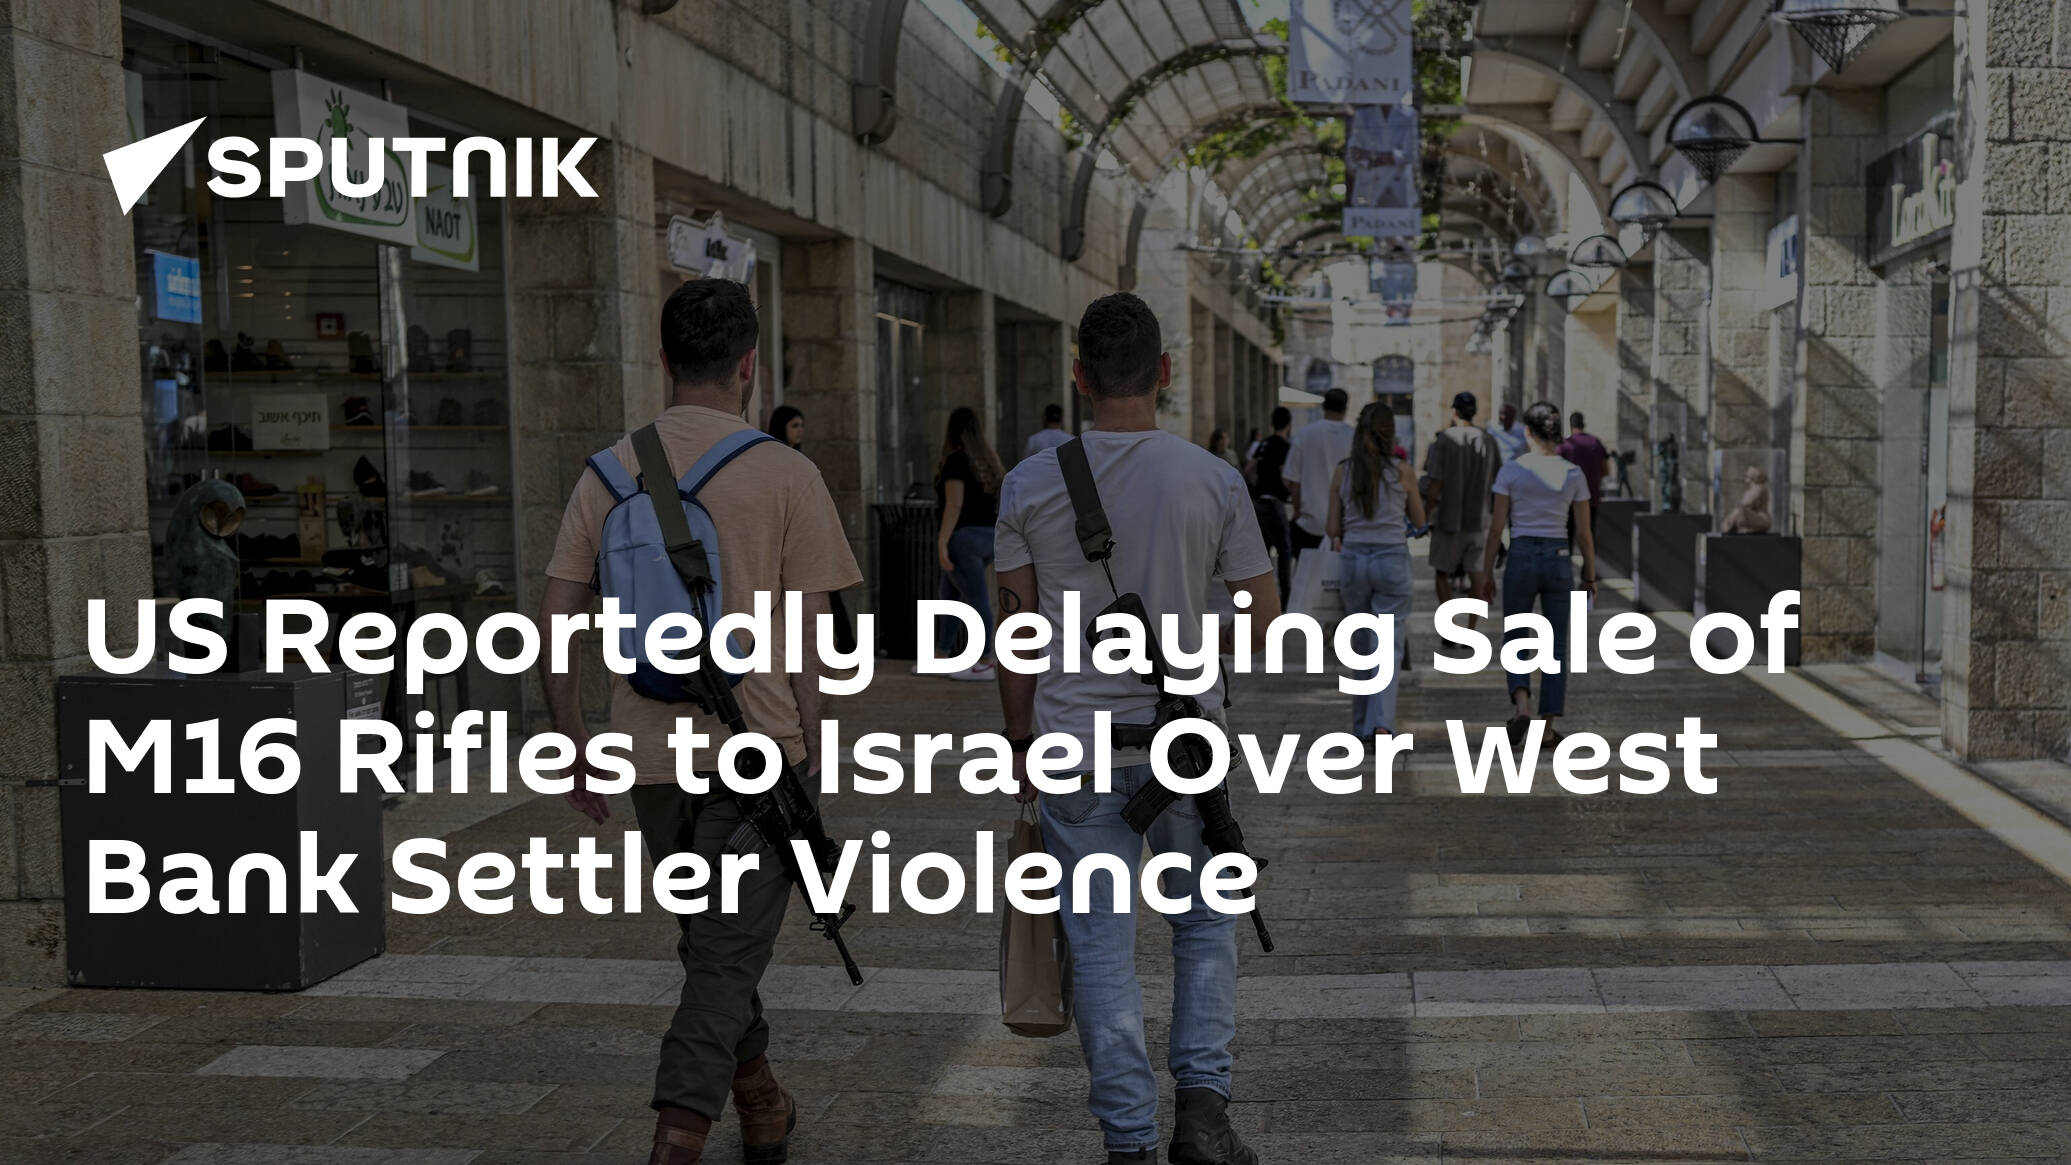 US Reportedly Delaying Sale of M16 Rifles to Israel Over West Bank Settler Violence